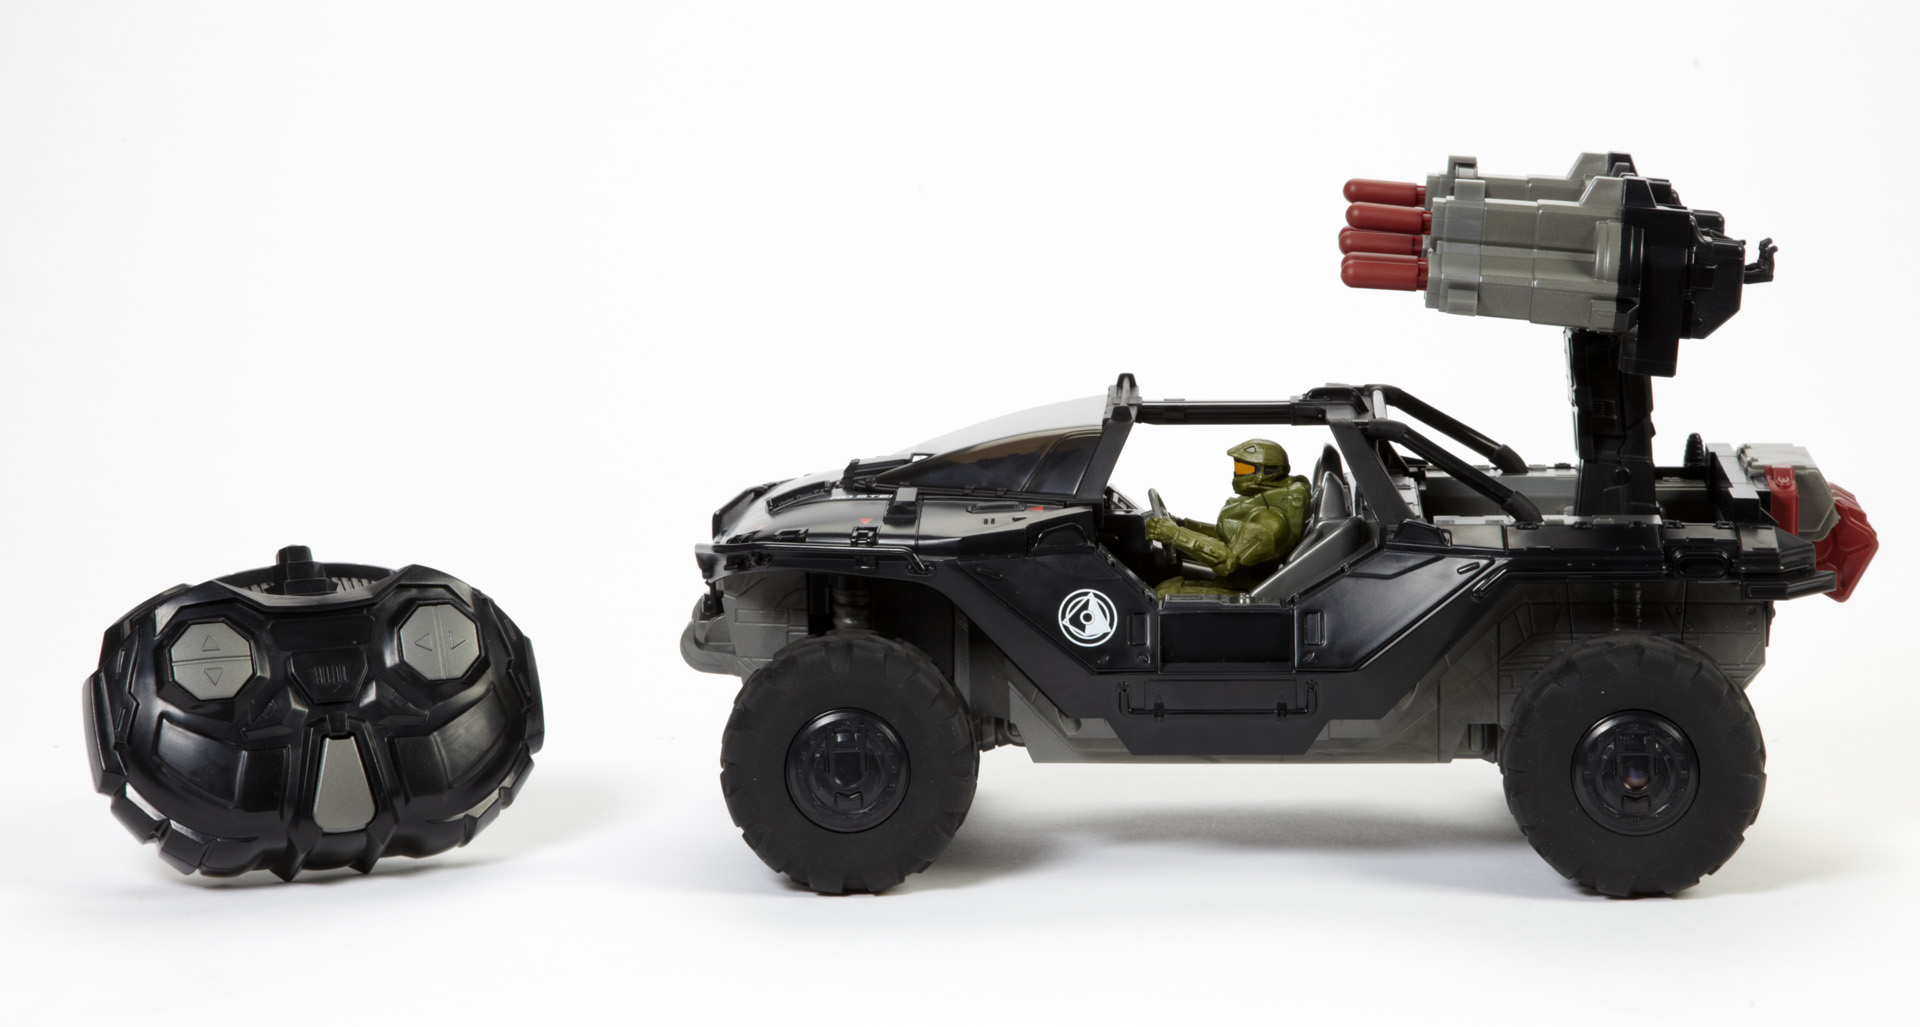 Mattel’s Doing All The Halo Toys Now, And They Look Killer